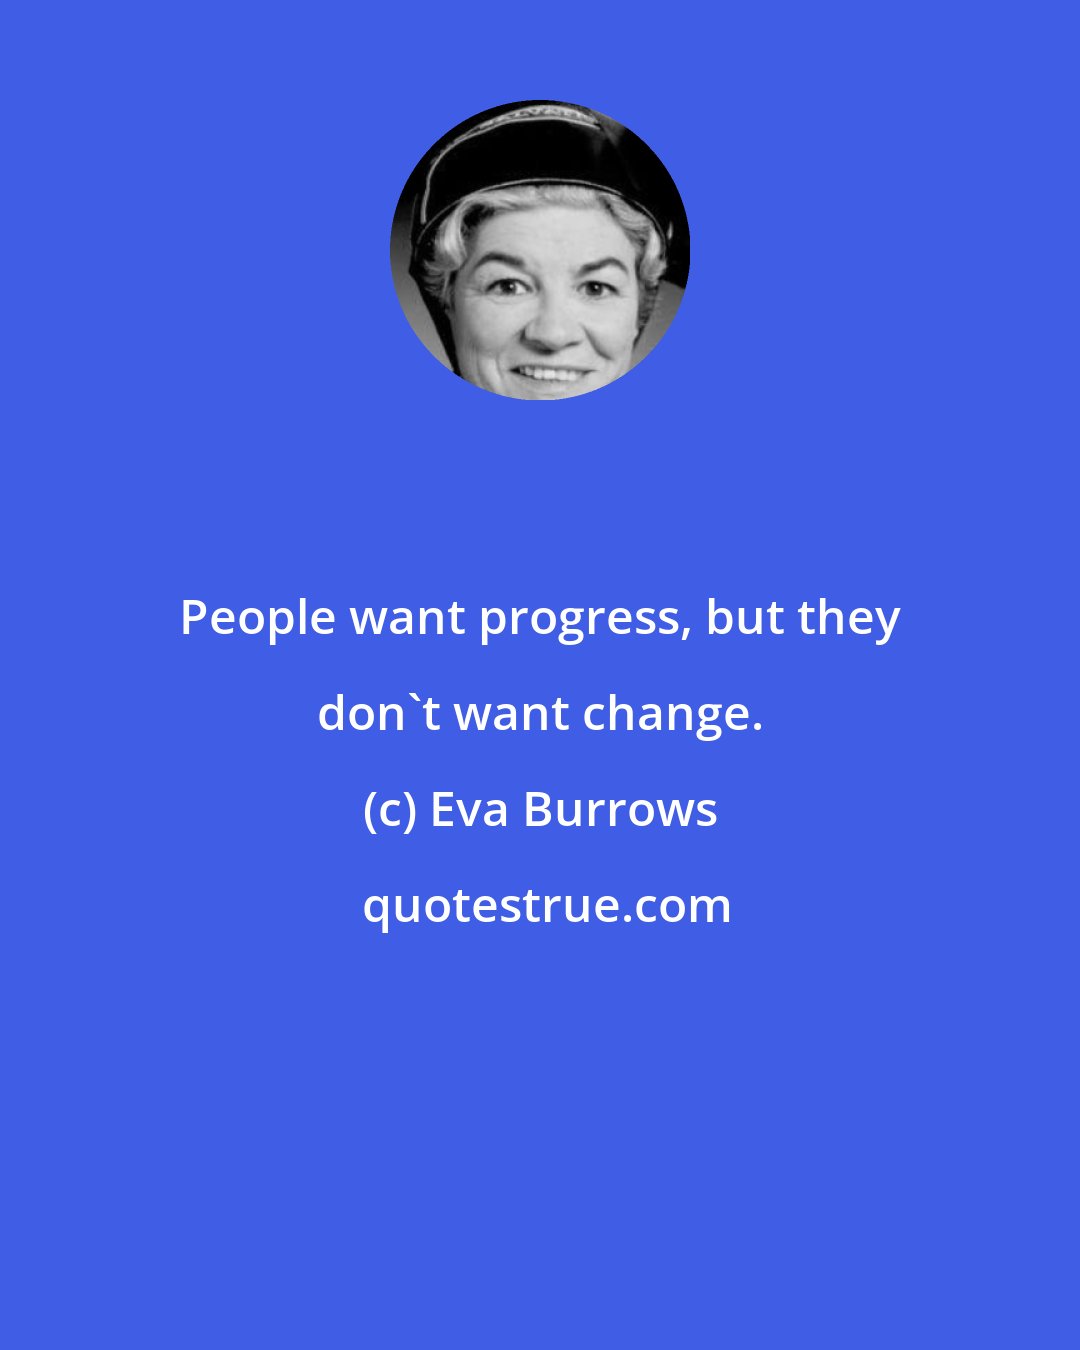 Eva Burrows: People want progress, but they don't want change.